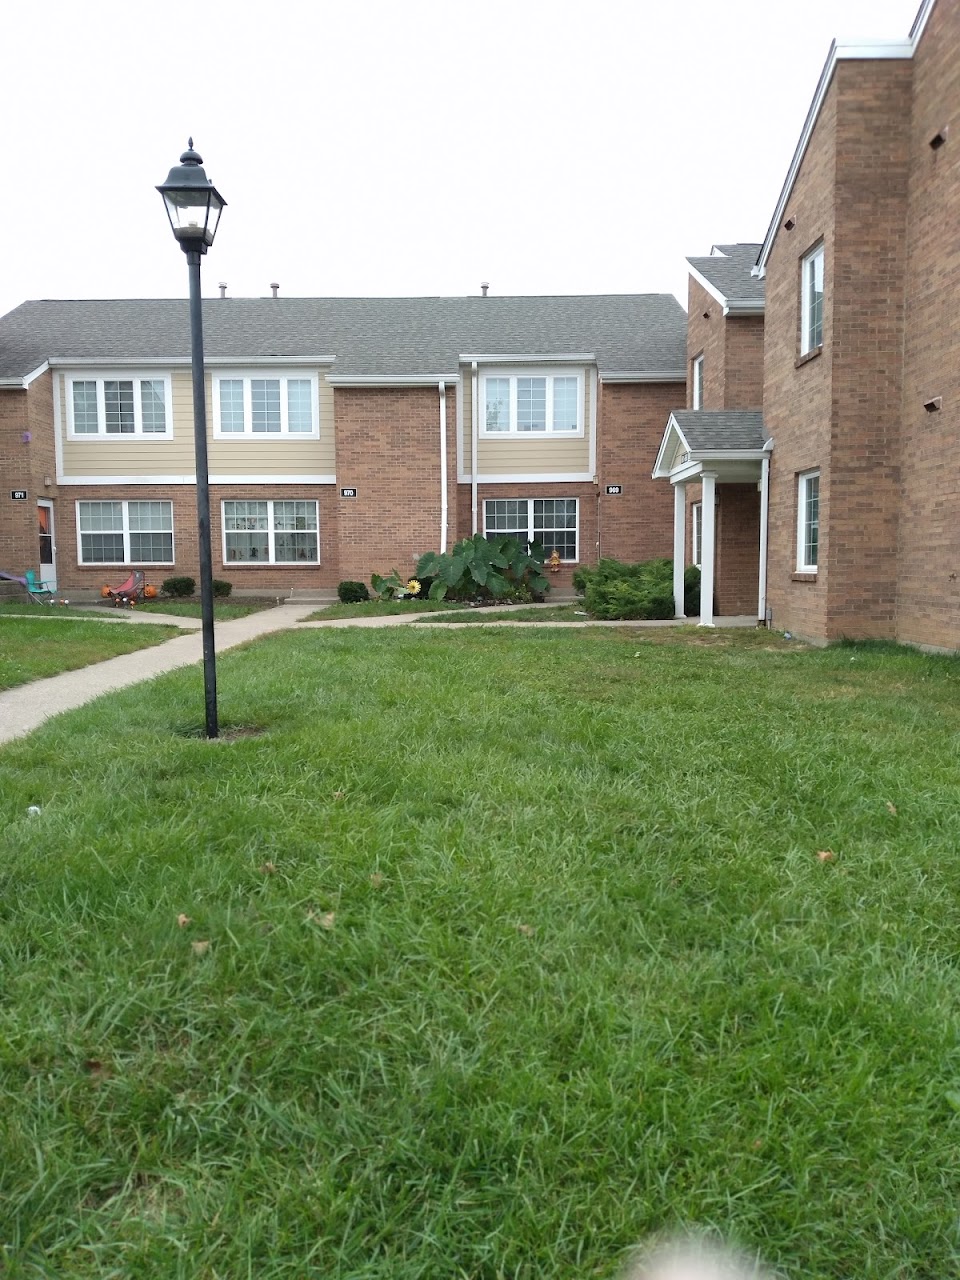 Photo of TAYLOR RIDGE APARTMENTS. Affordable housing located at REGAL RIDGE DRIVE INDEPENDENCE, KY 41051